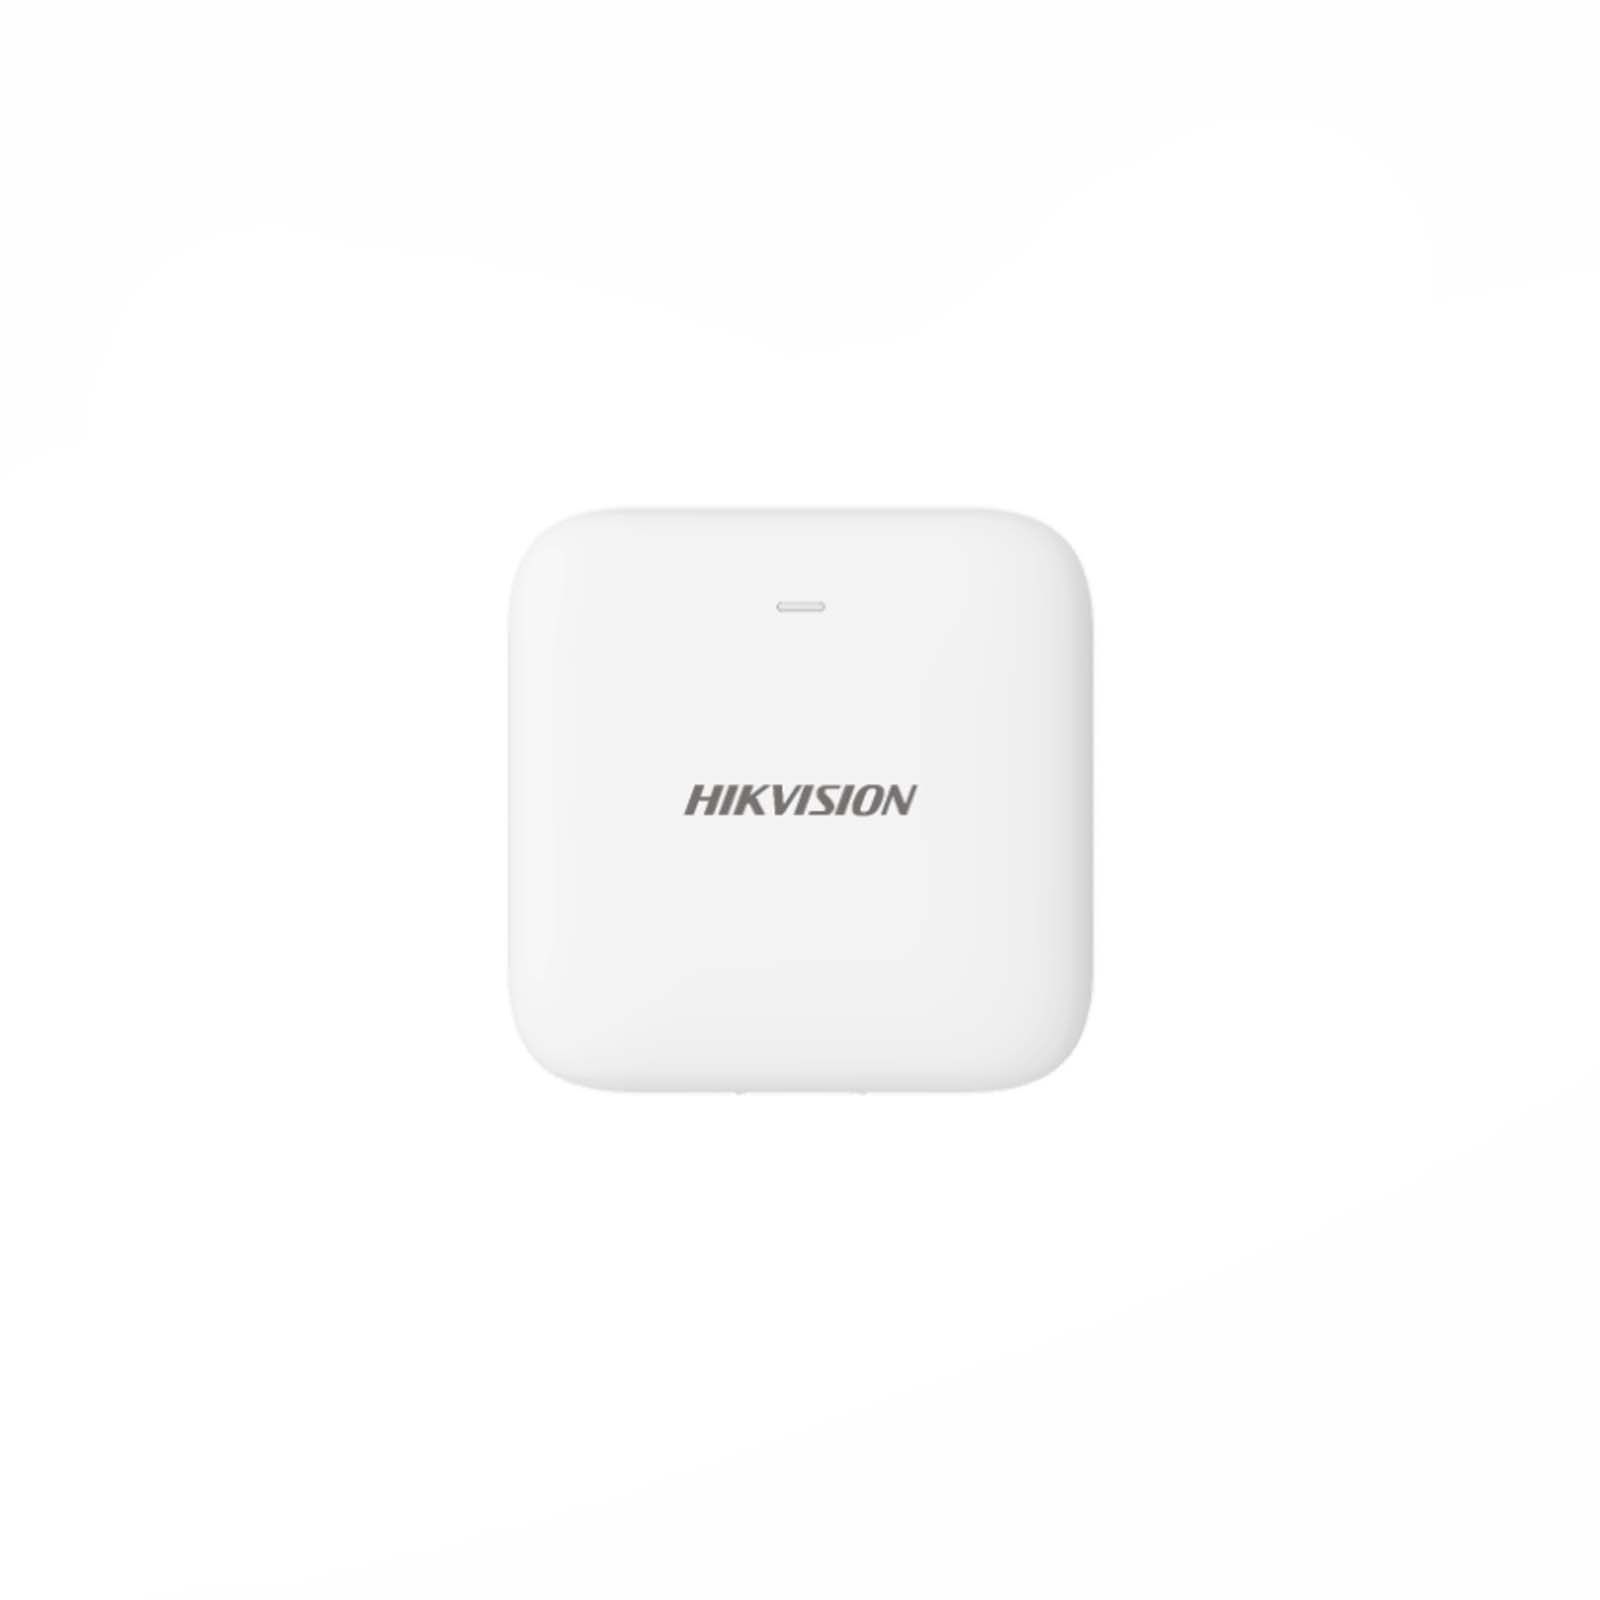 Axiom Hikvision 868Mhz wireless water leak detector